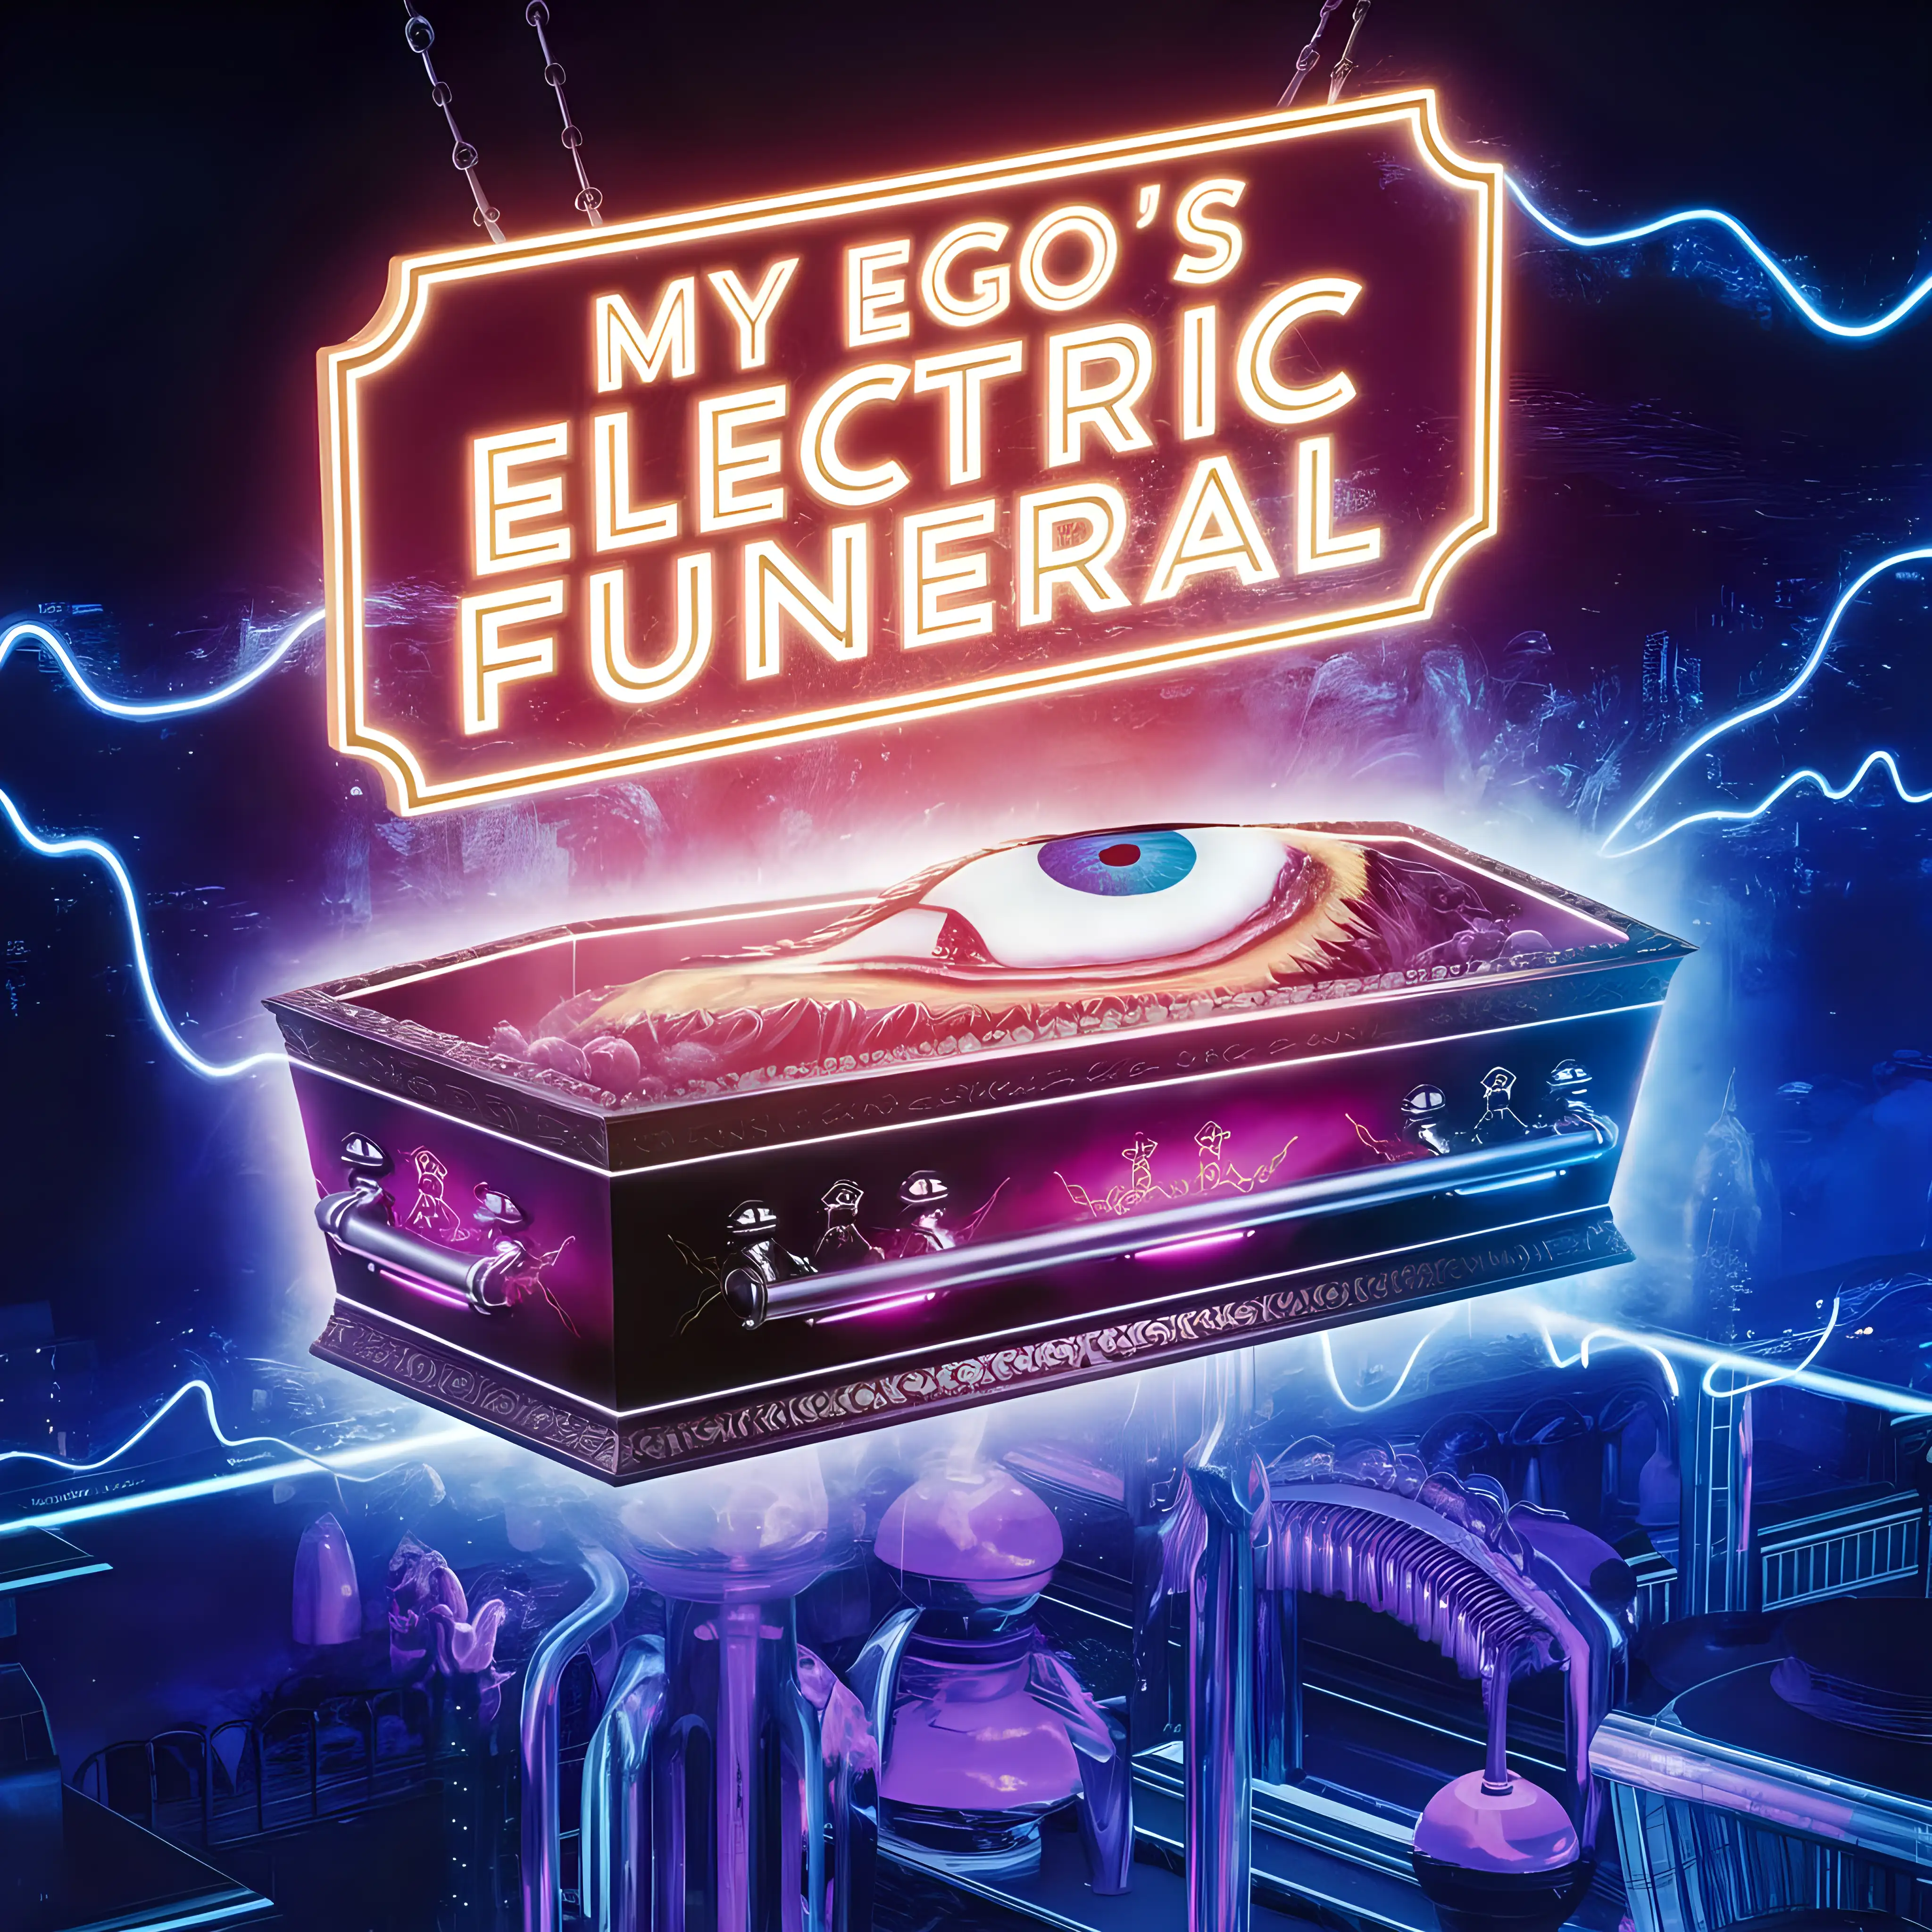 My Ego’s Electric Funeral. 
Neon
Floating Casket
